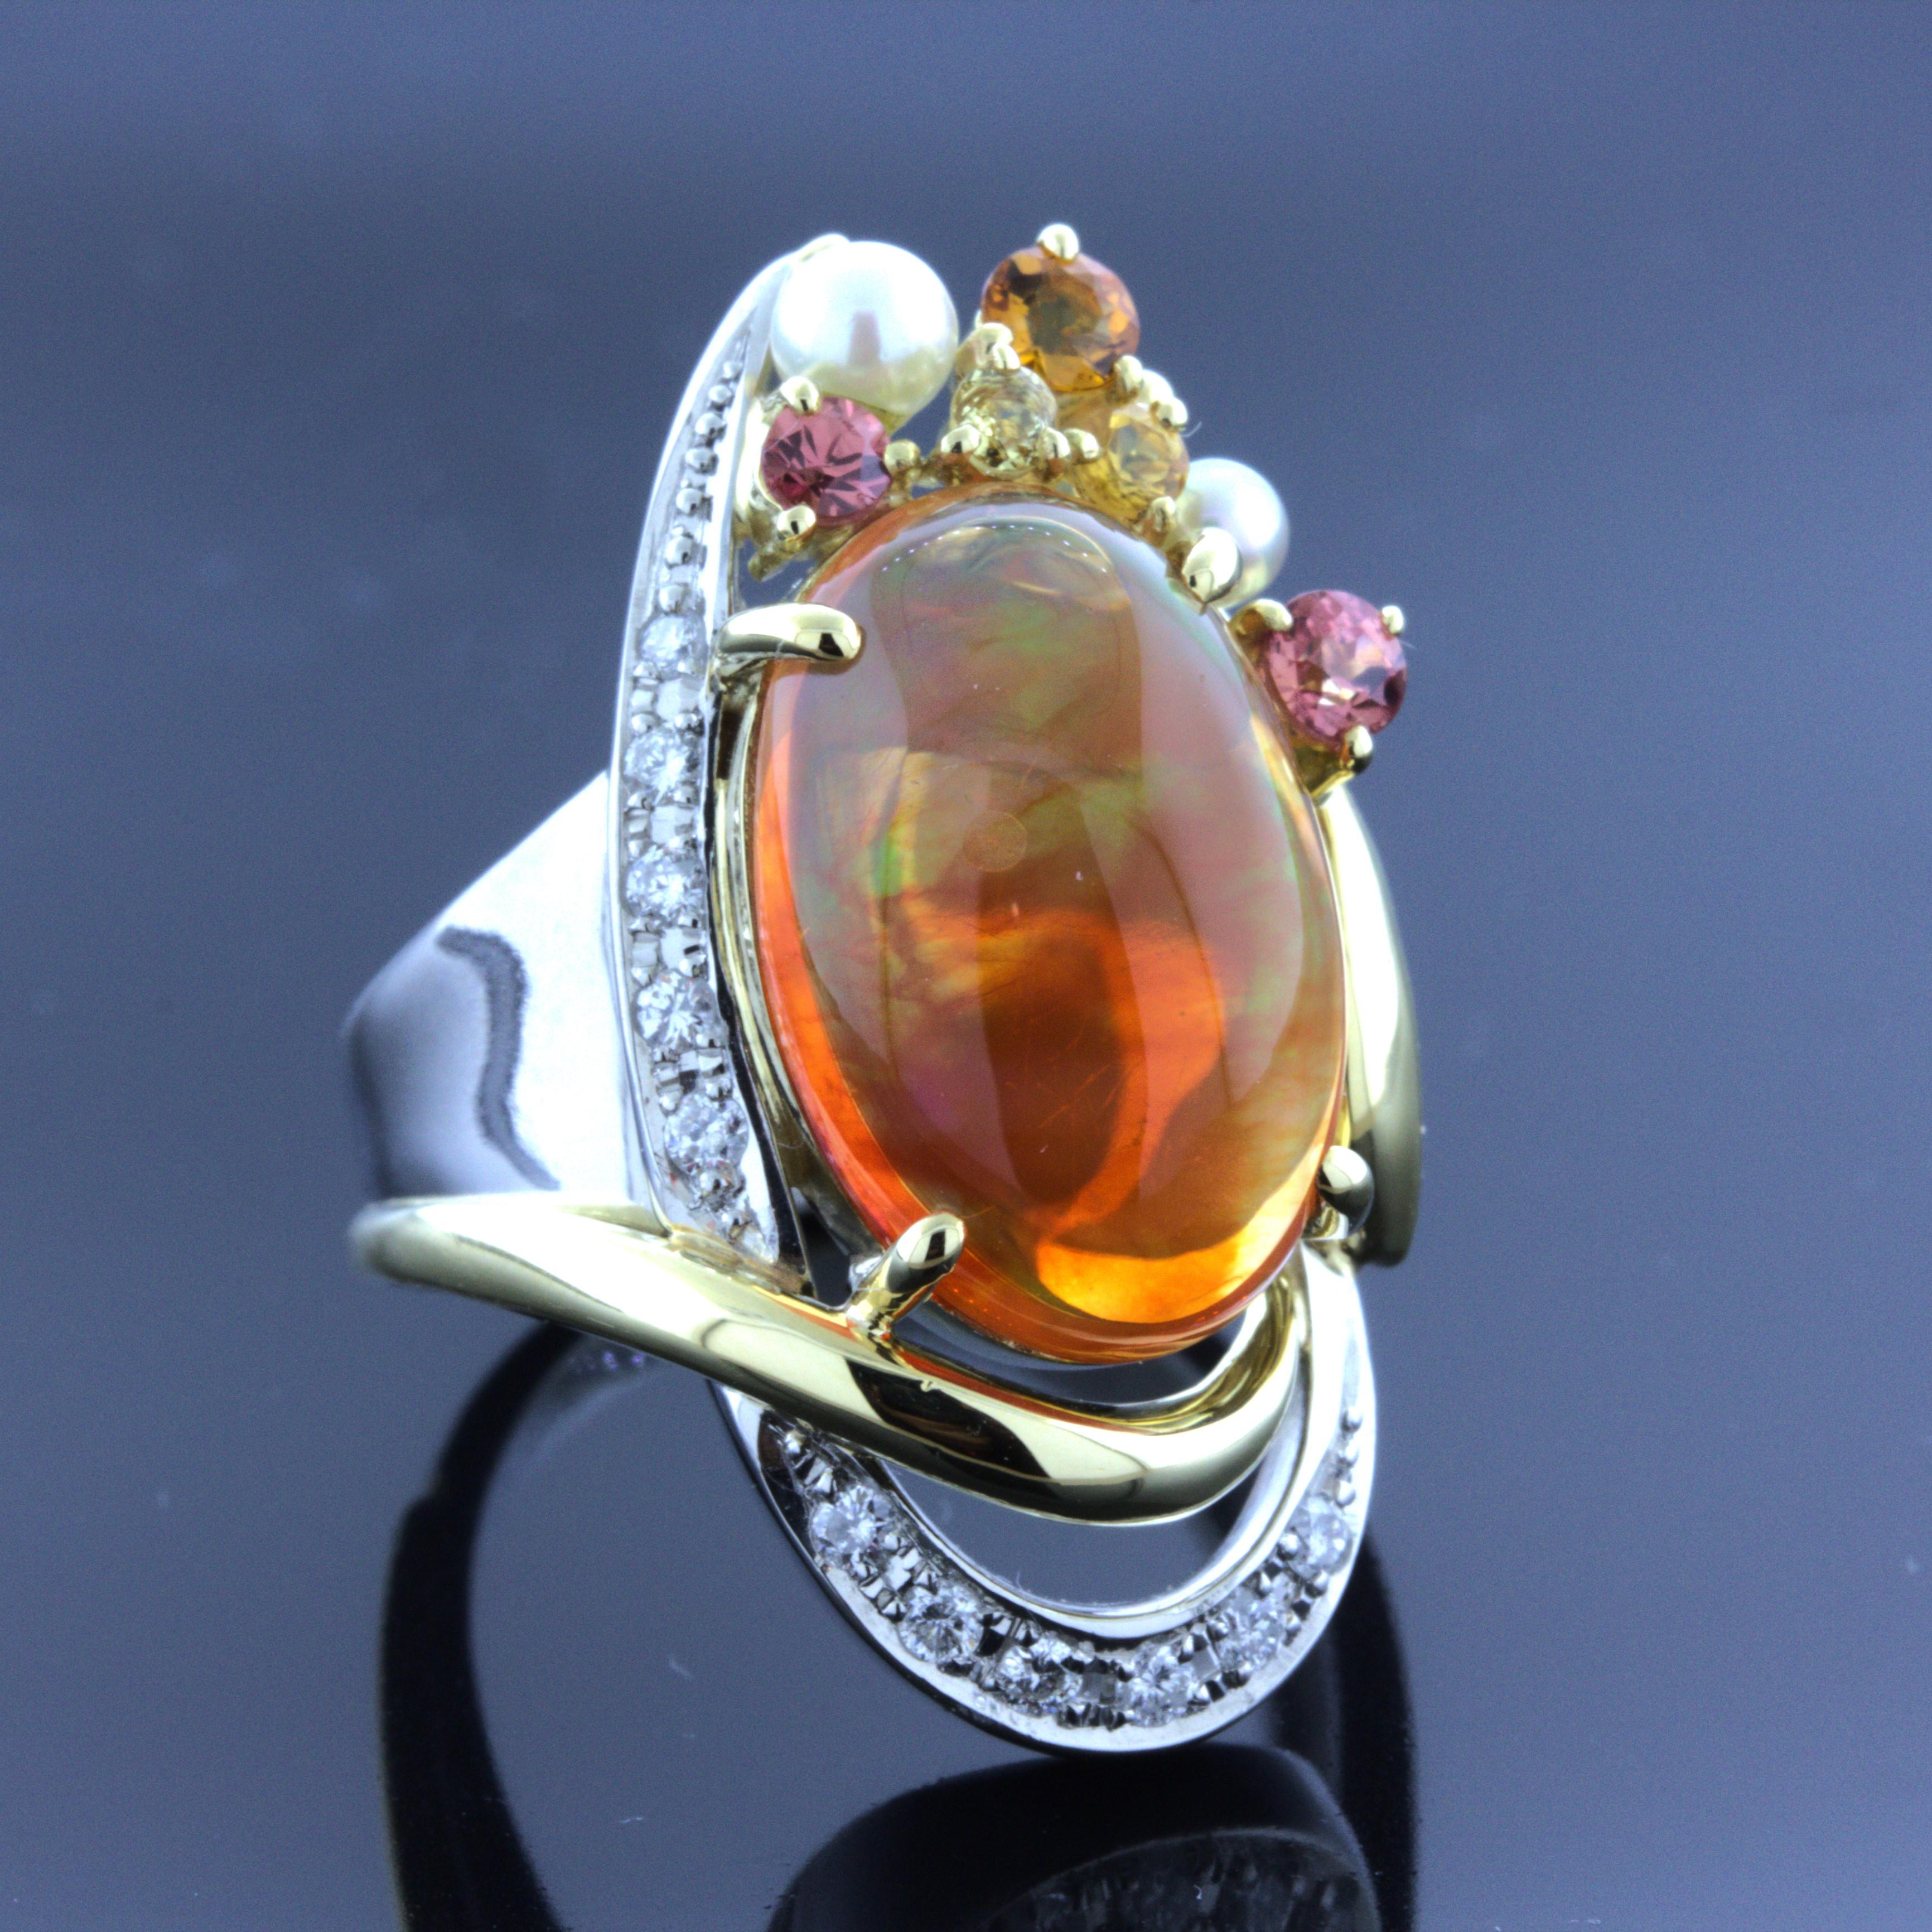 A stylish platinum ring that gives Autumn season vibes! It features a 5.86 carat fine Mexican fire opal with excellent play-of-color and a rich jelly orange color. It is complemented by 0.17 carats of round brilliant-cut diamonds, seed pearls, and